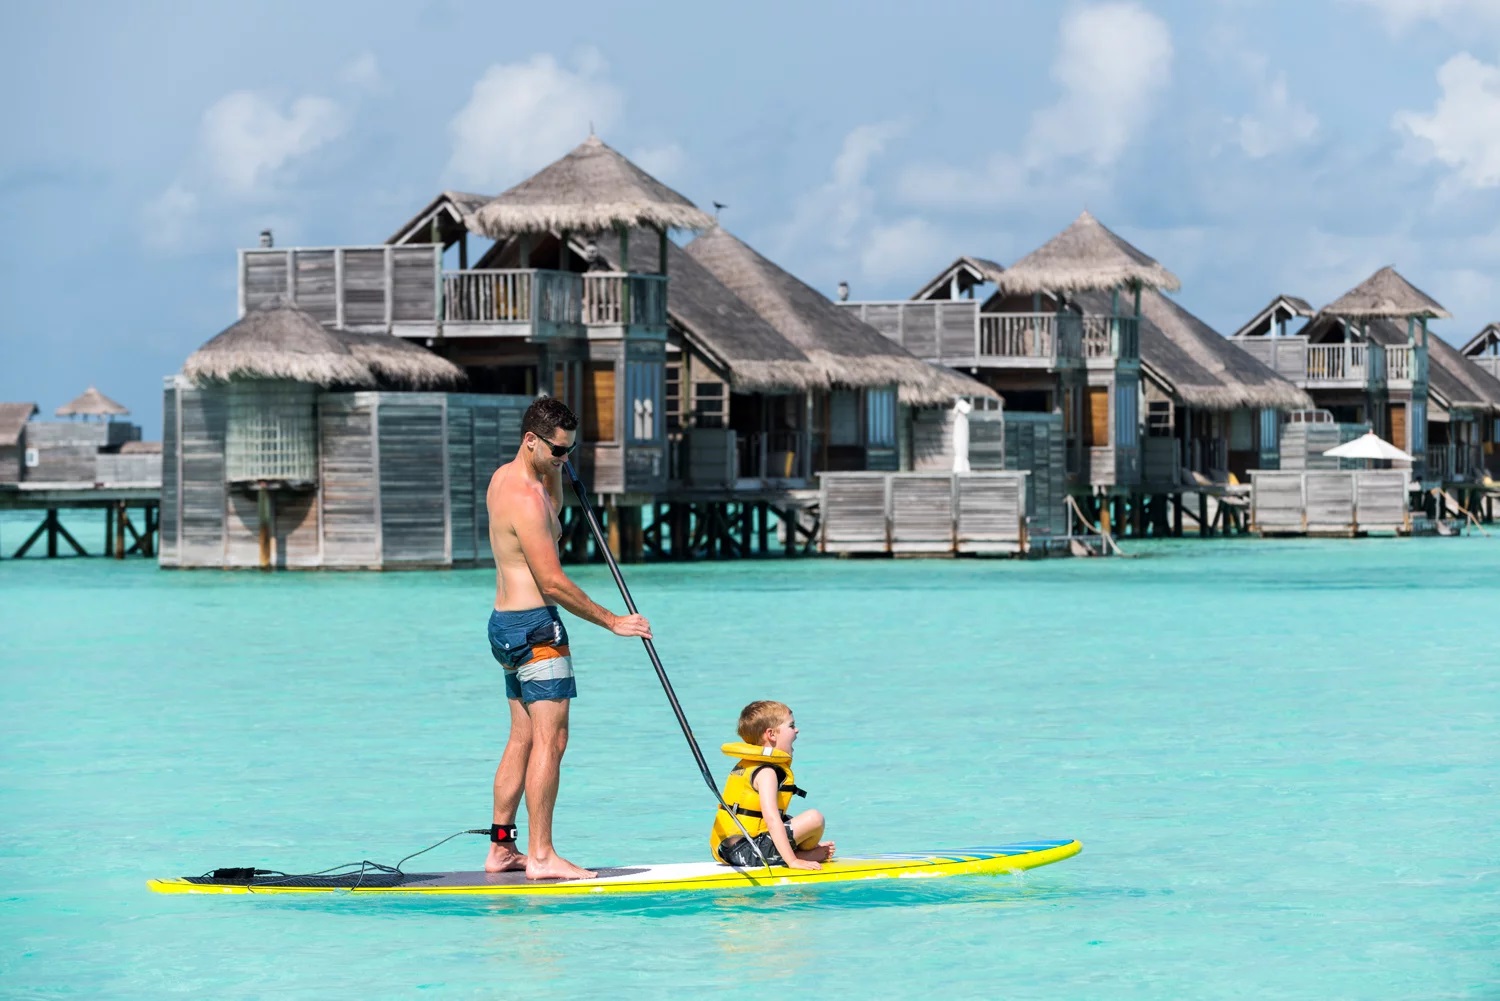 In the heart of the Maldives, Gili Lankanfushi carves out a niche in exclusivity